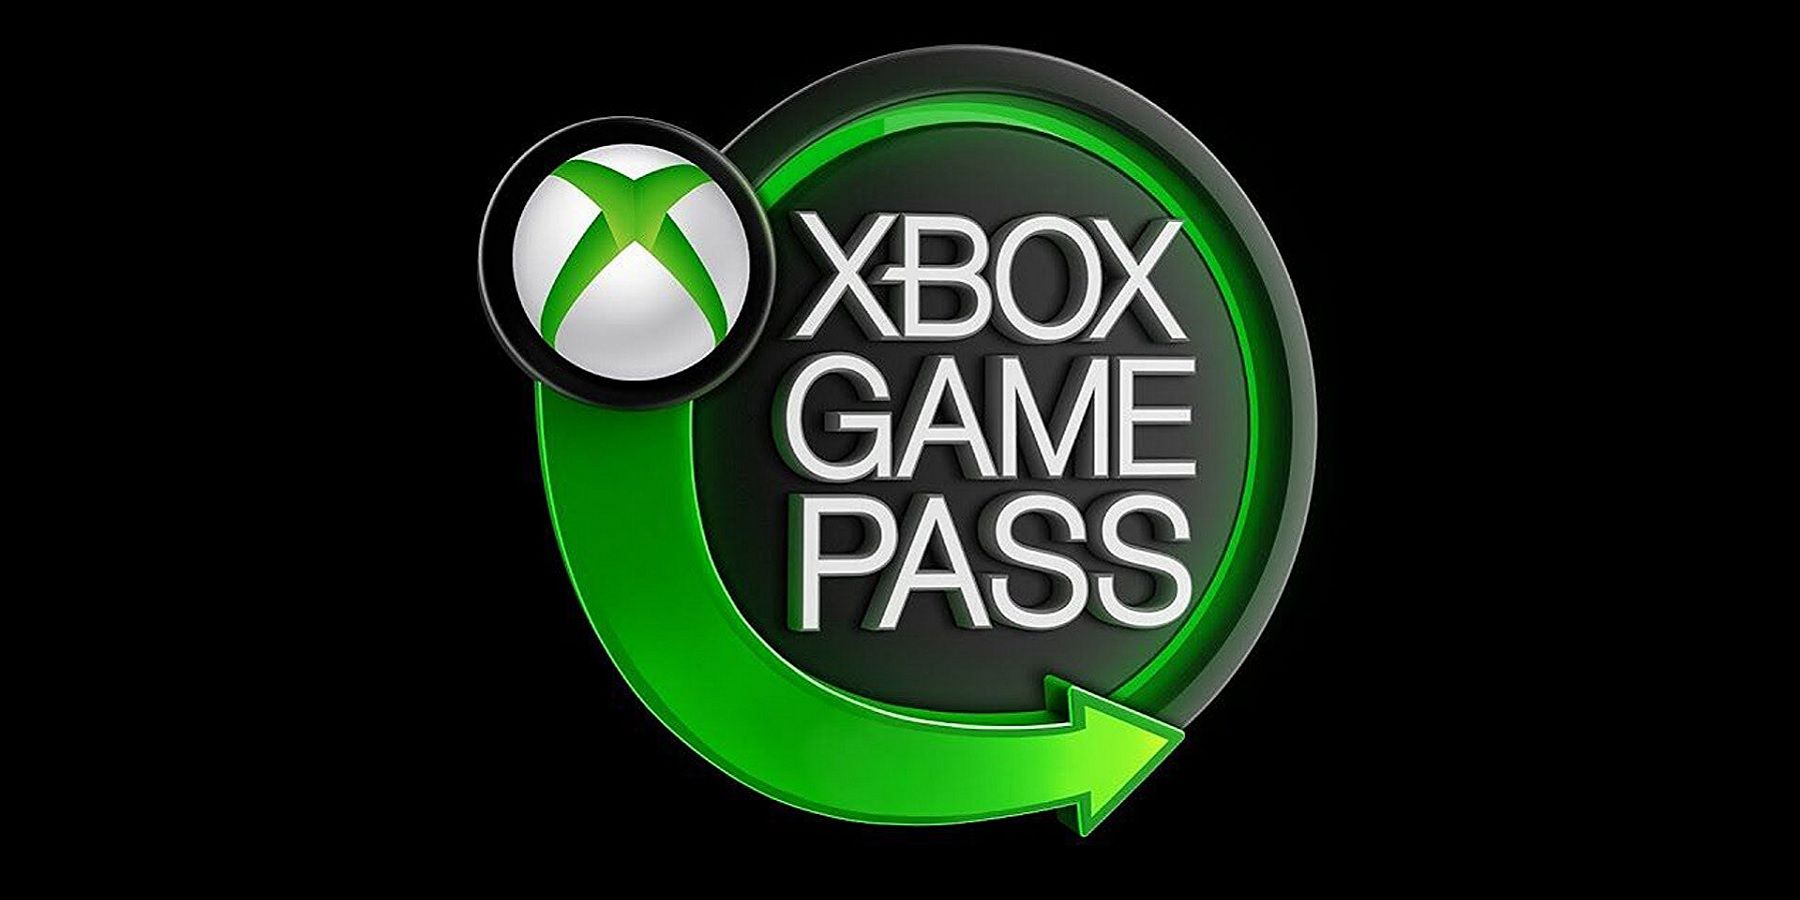 Xbox Game Pass Confirms 8 Games That Are Leaving in September